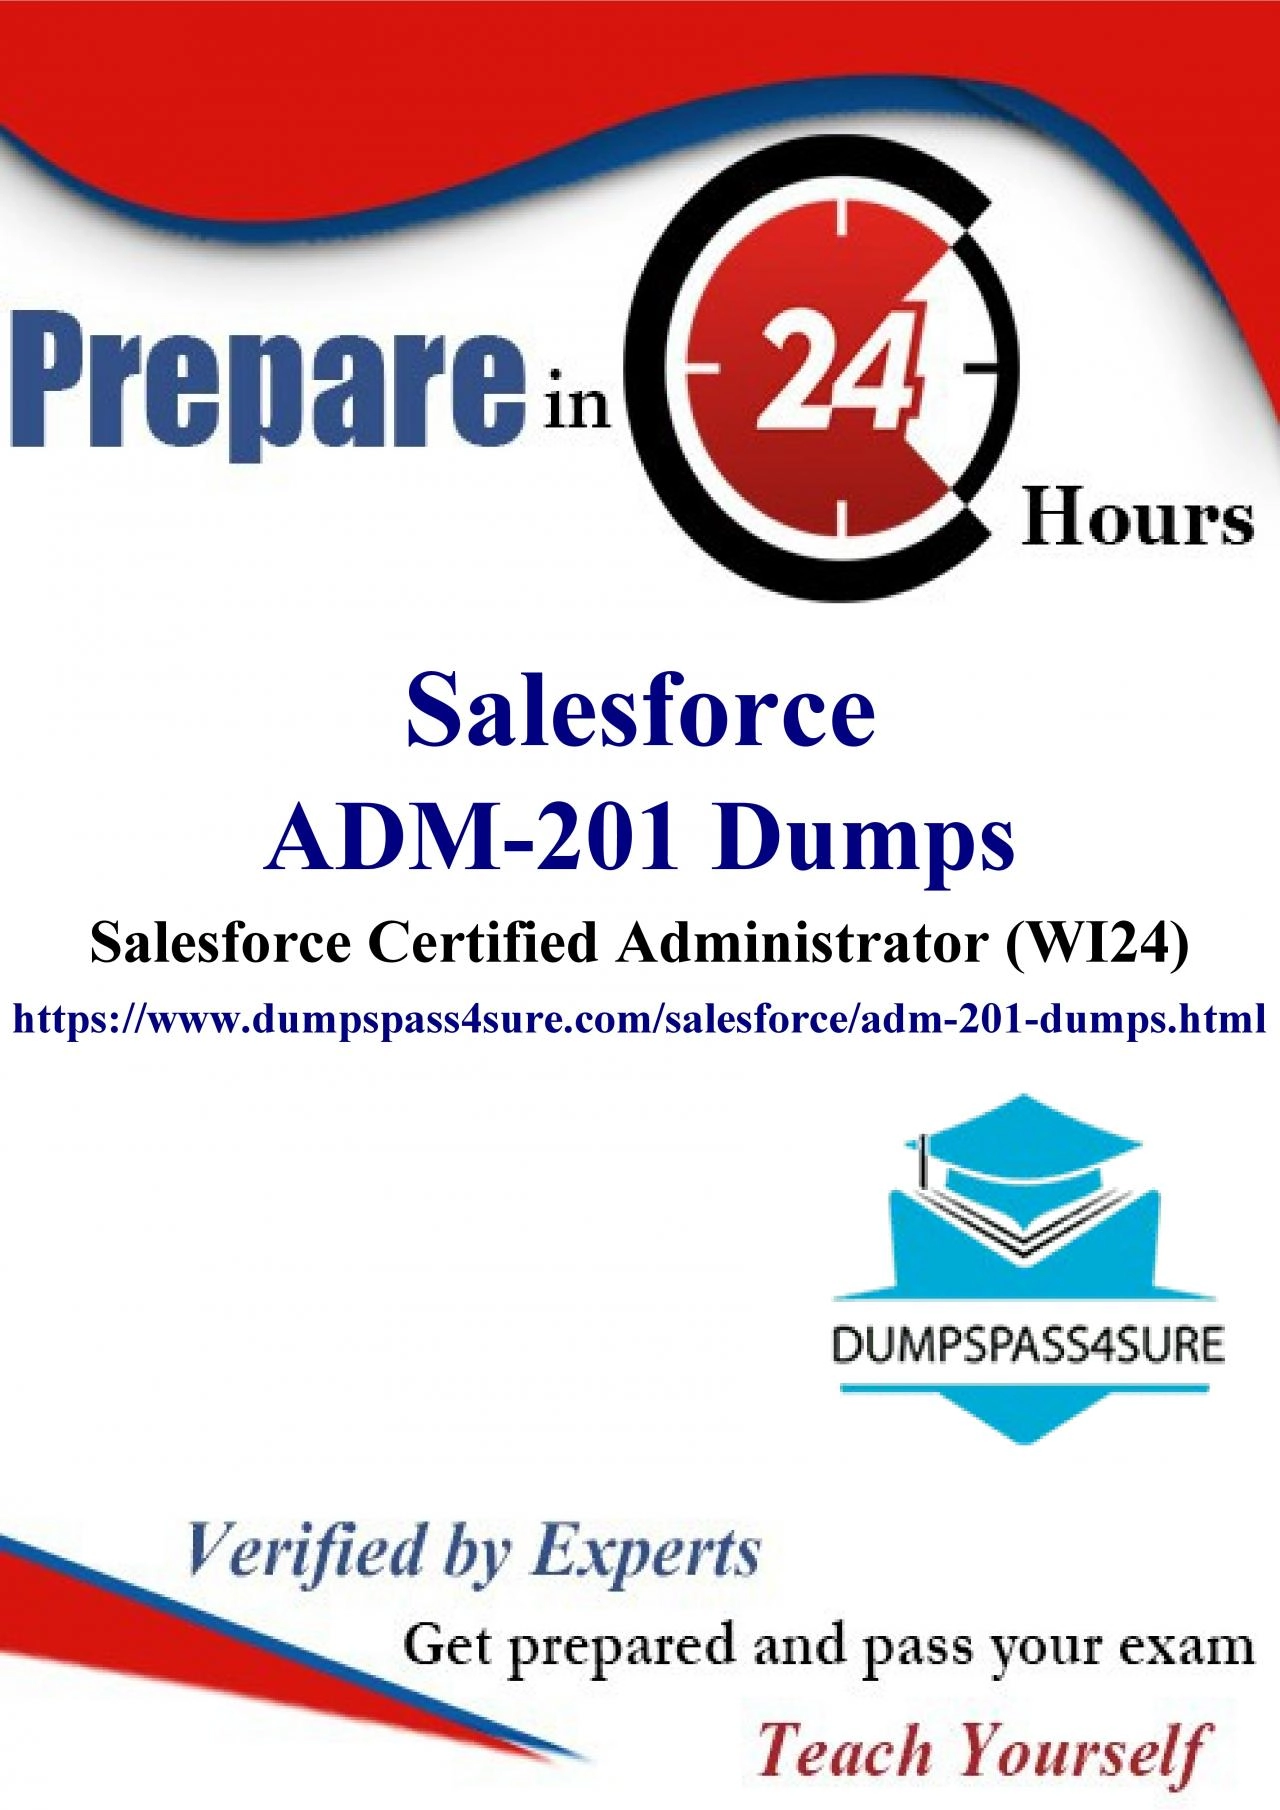 Eager to Conquer Salesforce ADM-201 Exam Questions? Find material at DumpsPass4Sure!